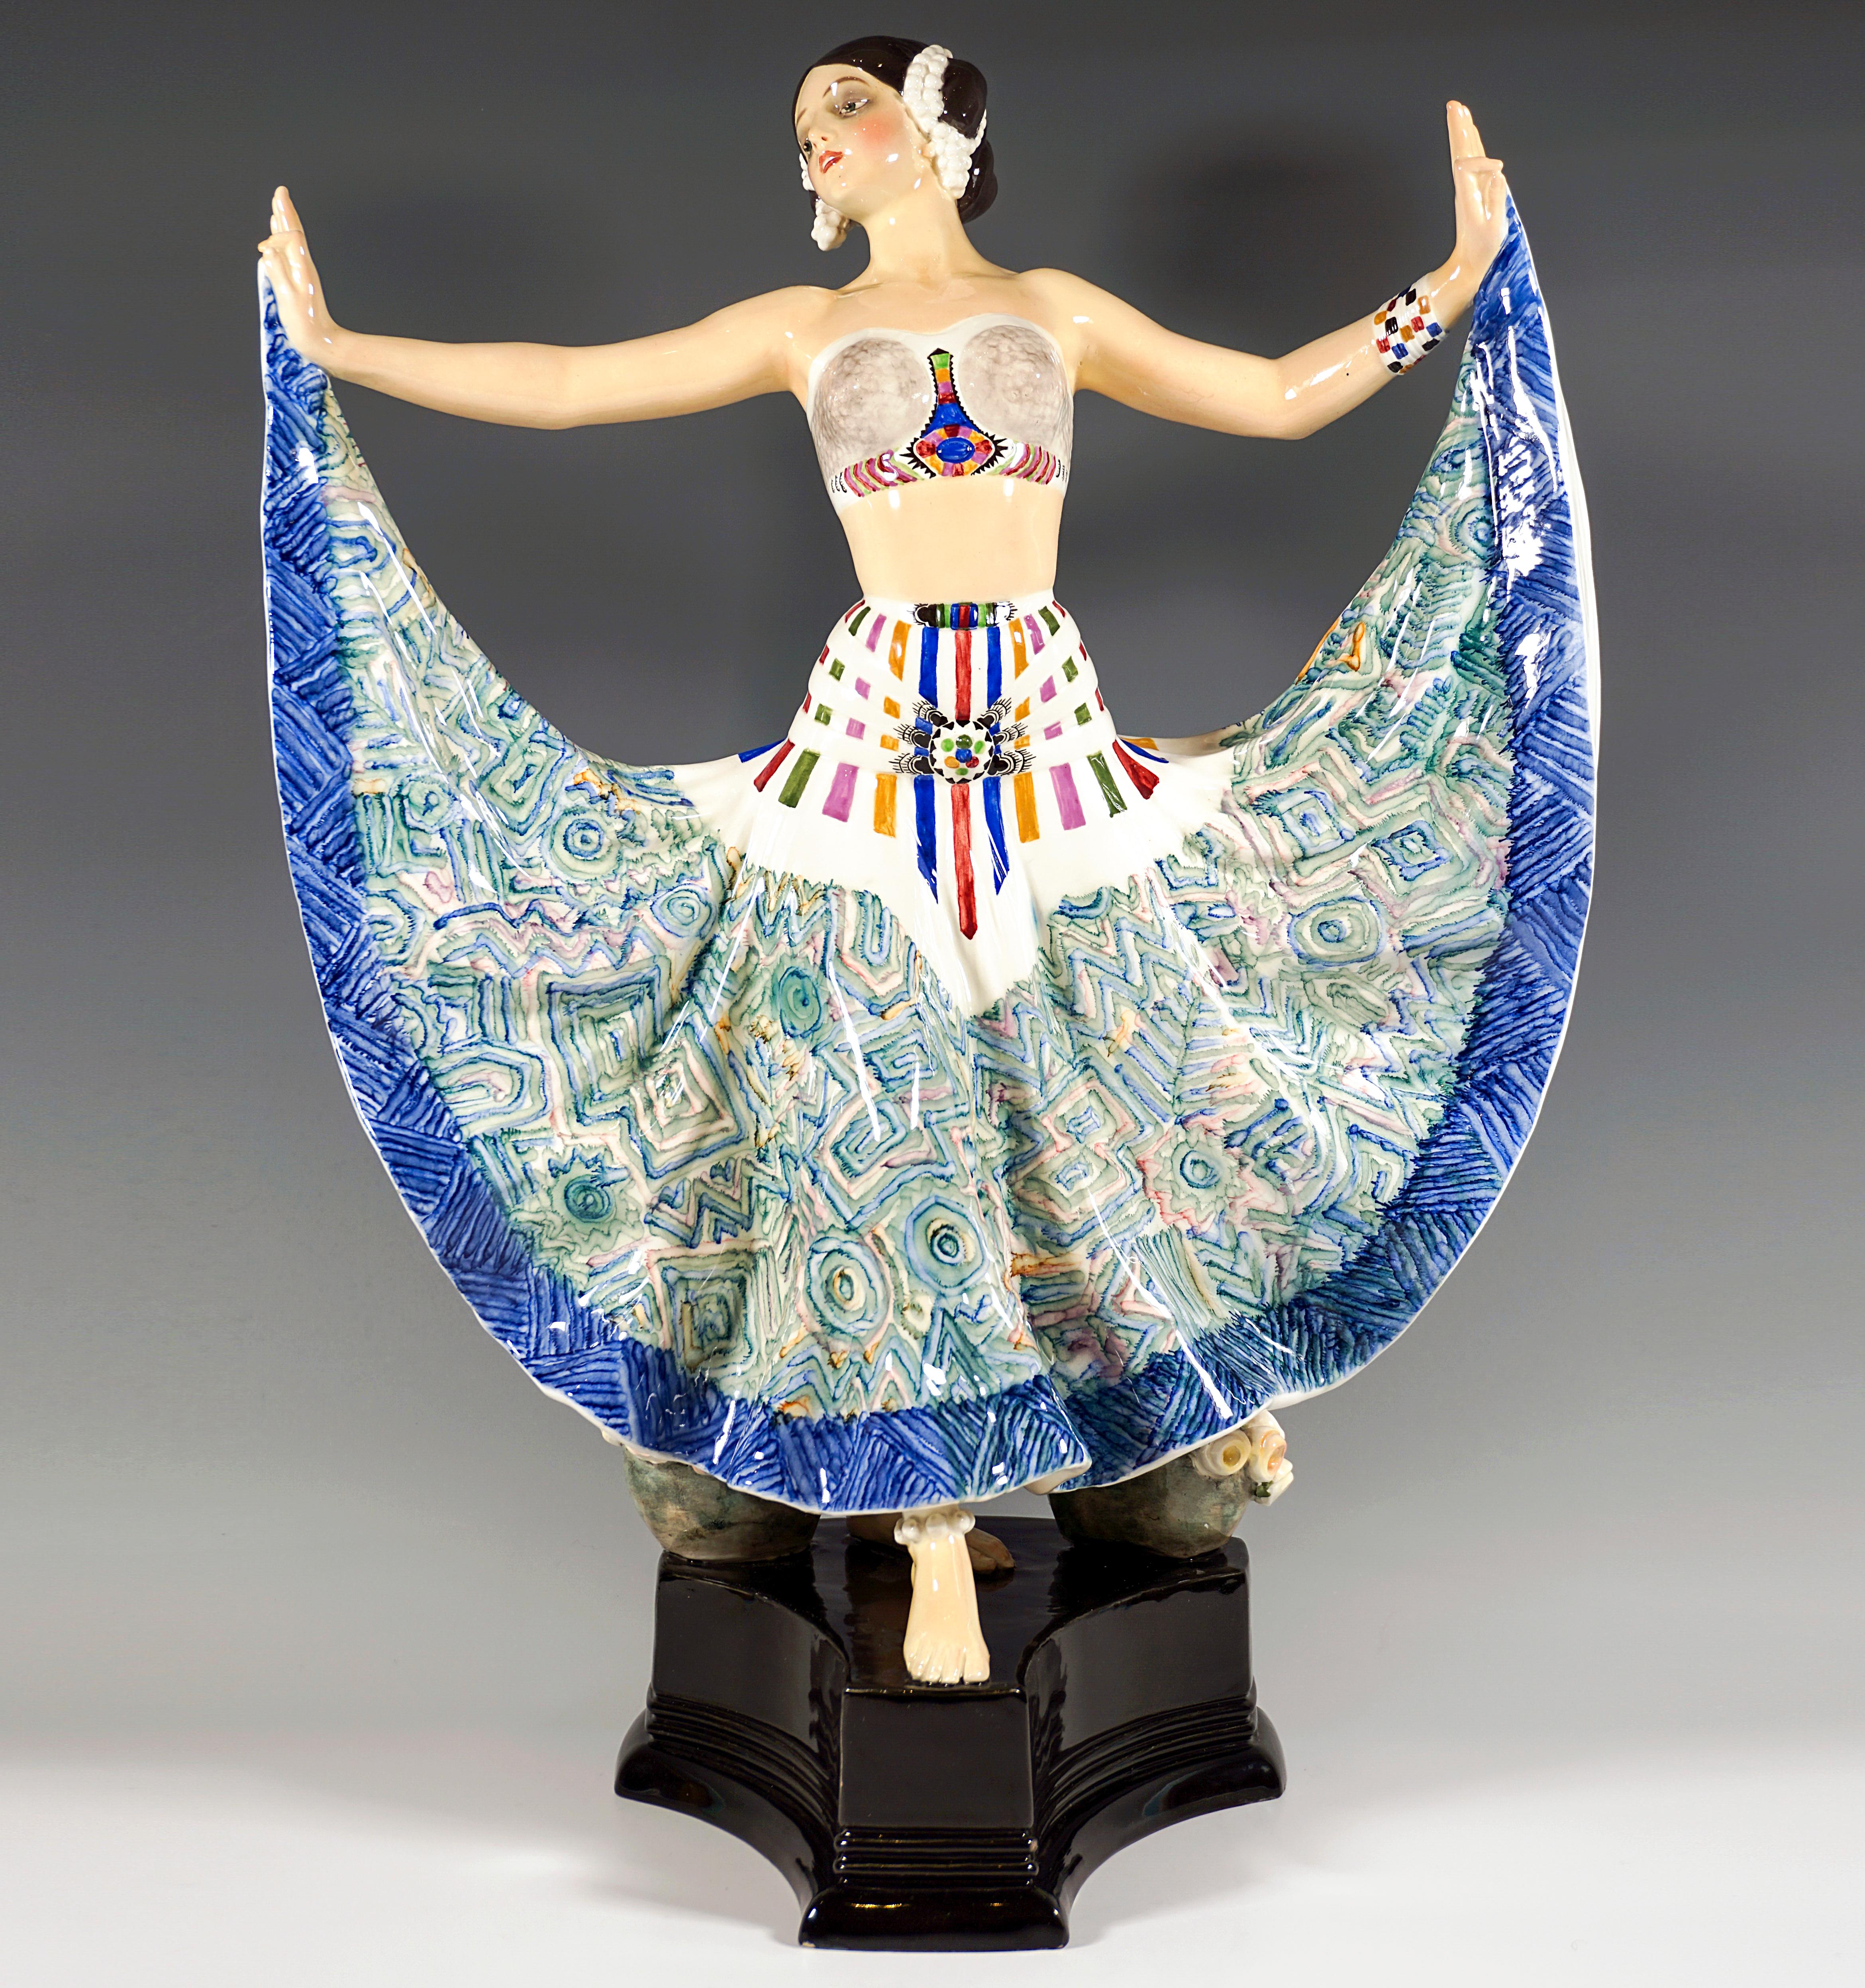 Excellent Goldscheider Art Déco ceramic figure of the 1920s.
Depiction of dancer Ruth Saint Denis (1877/79 - 1968, actually Ruth Dennis, 'Miss Ruth') performing her dance 'Radha'- Dance of the Five Senses, first performed in 1906.
Dancer with her